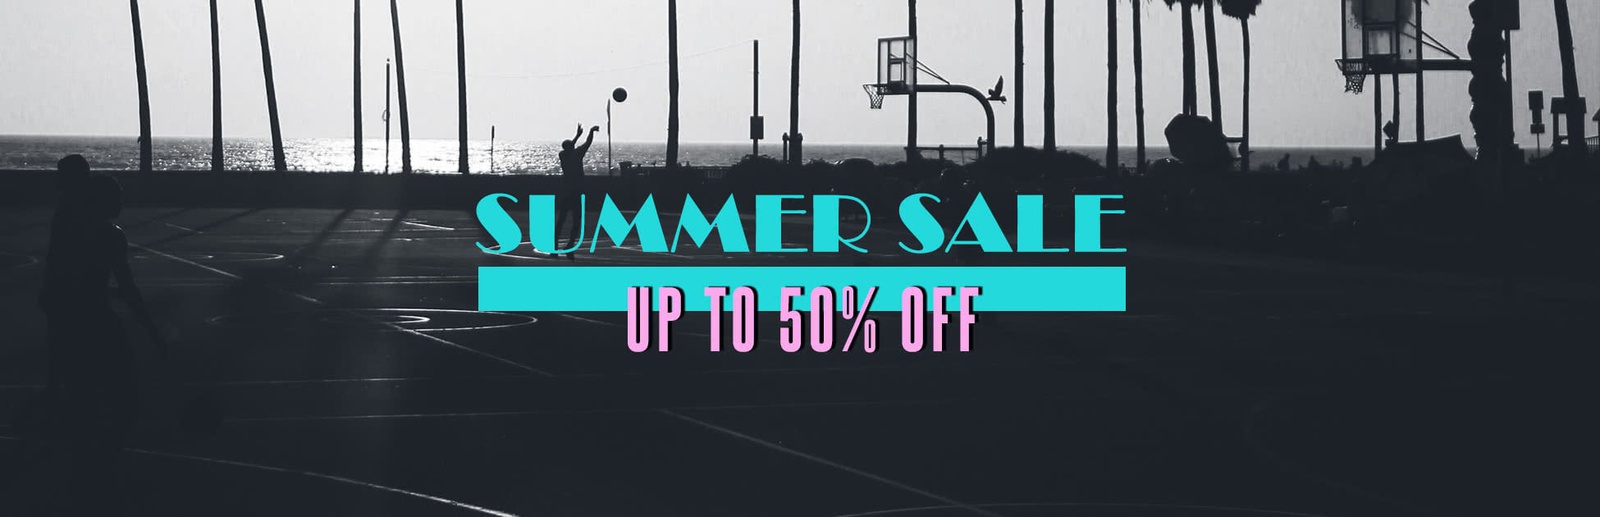 SUMMER SALE - UP TO 50% OFF